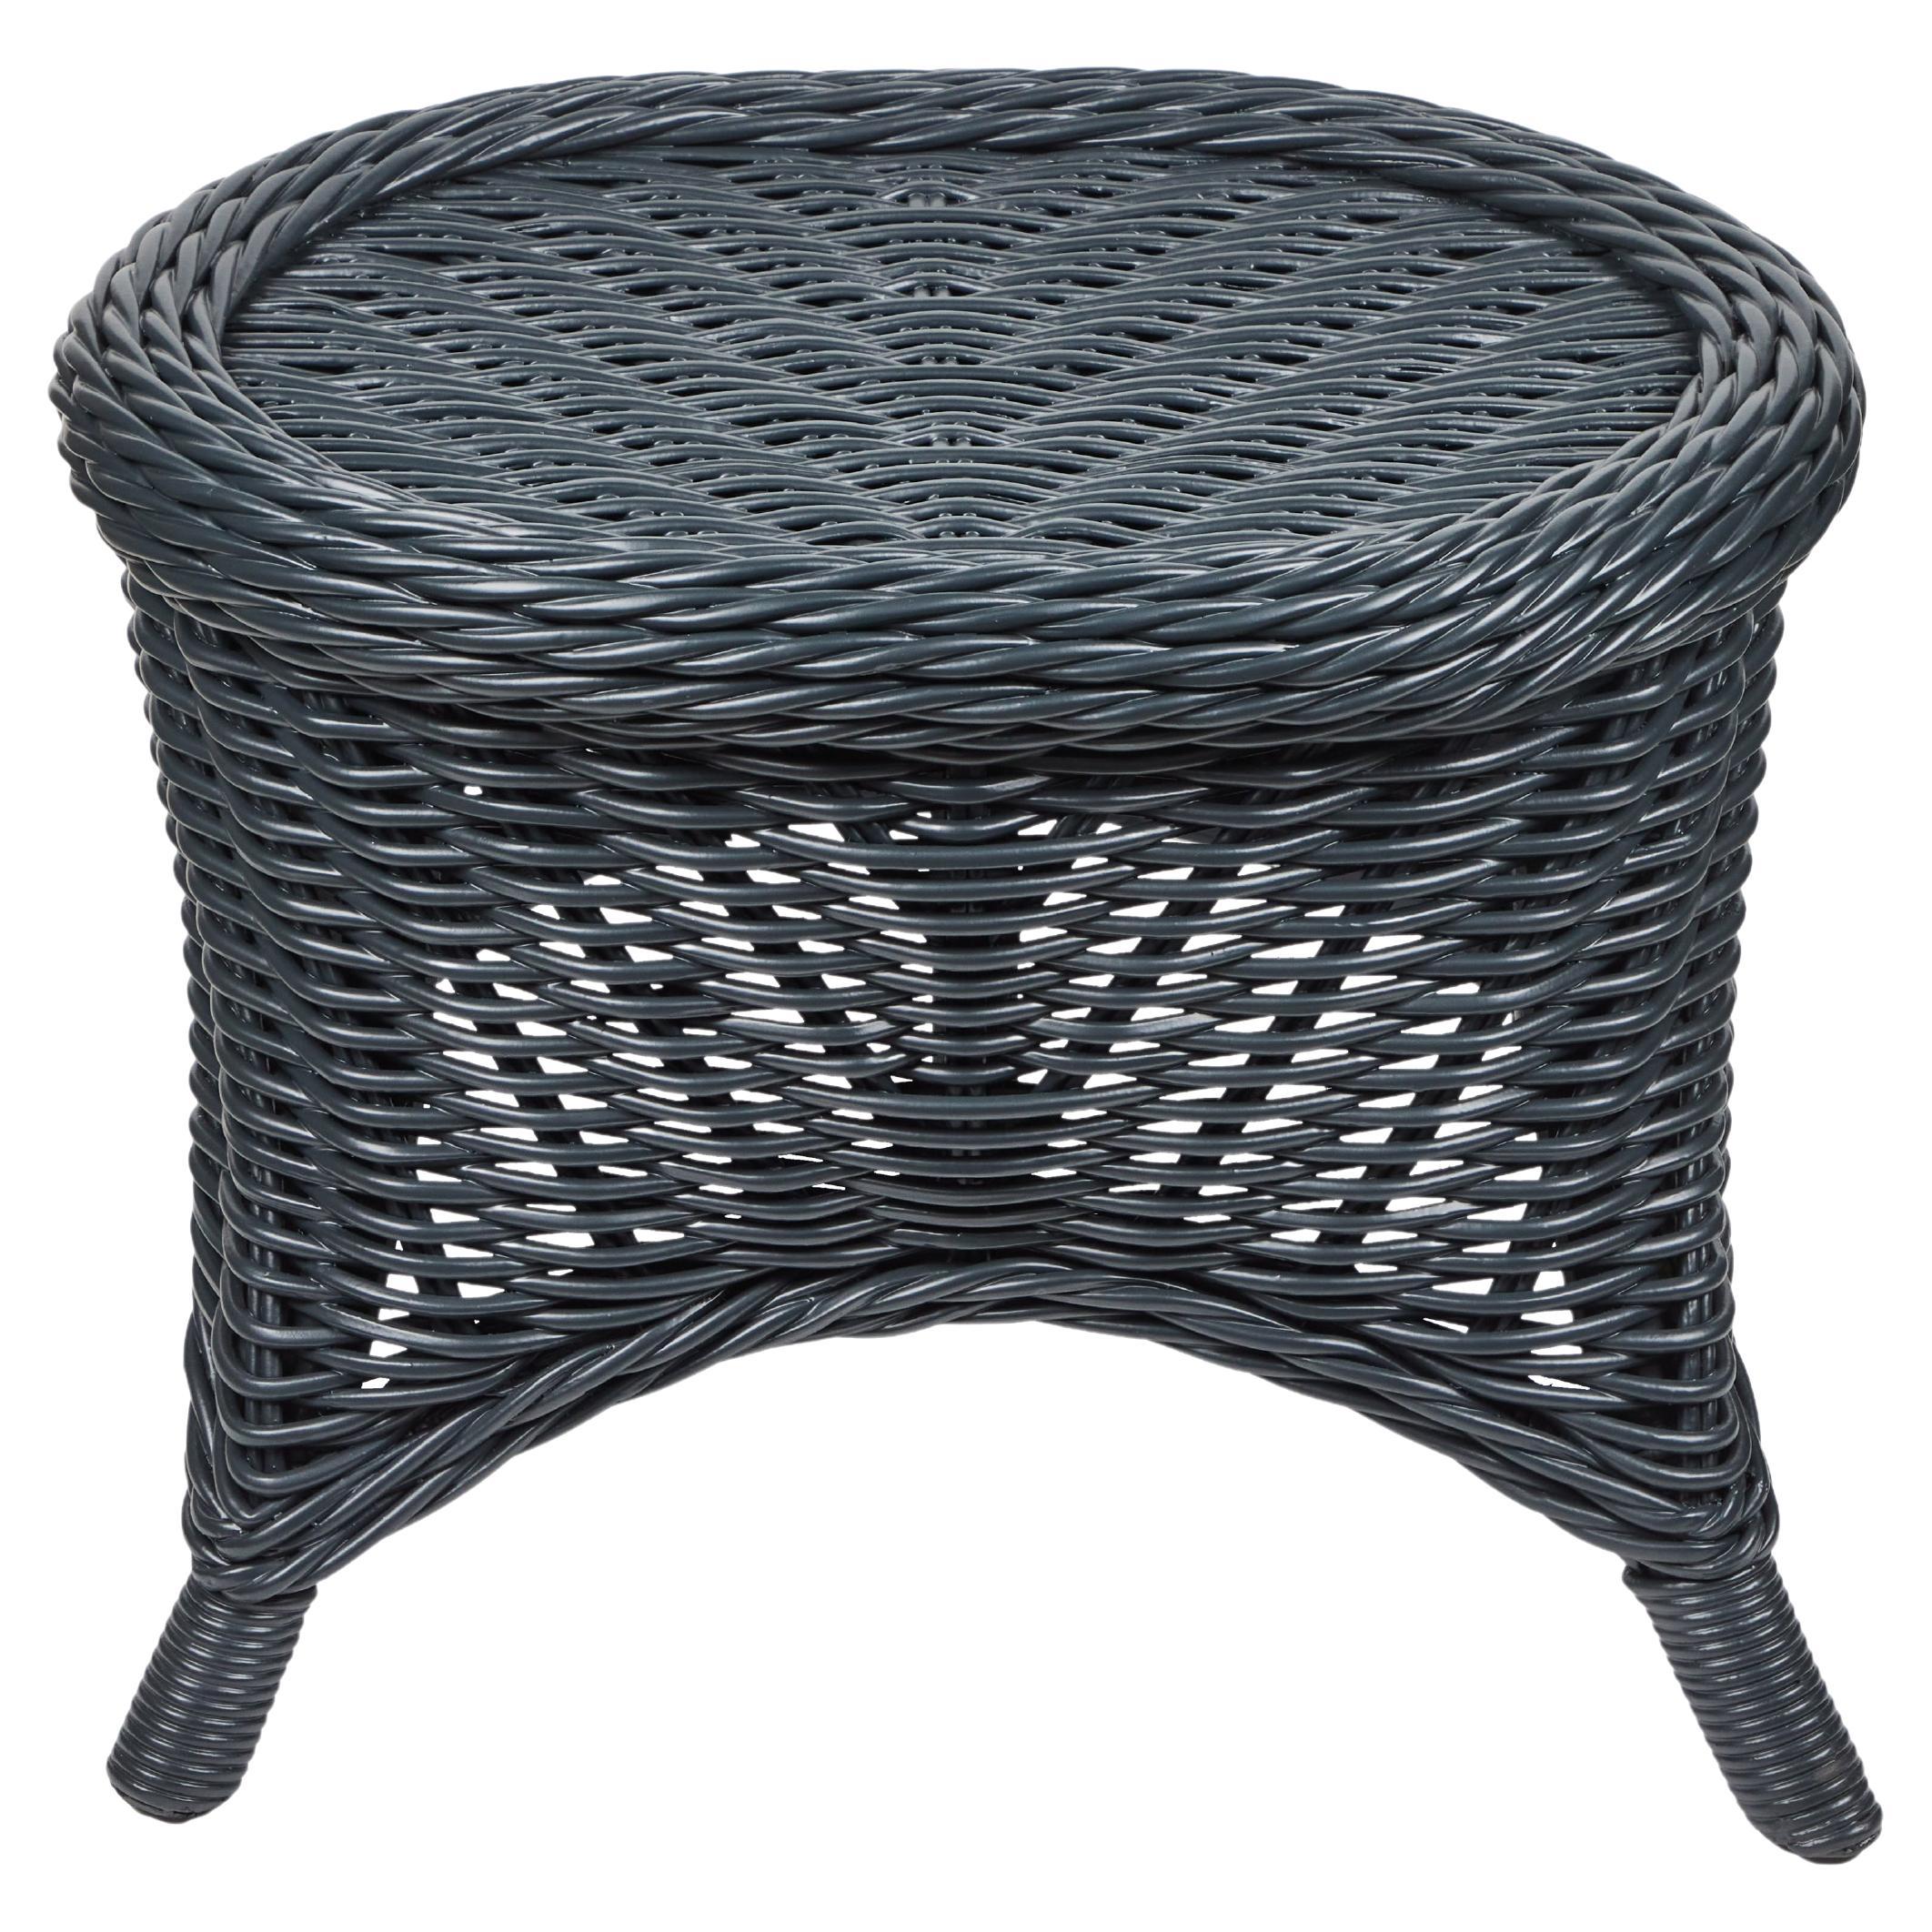 Vintage Wicker Table For Sale